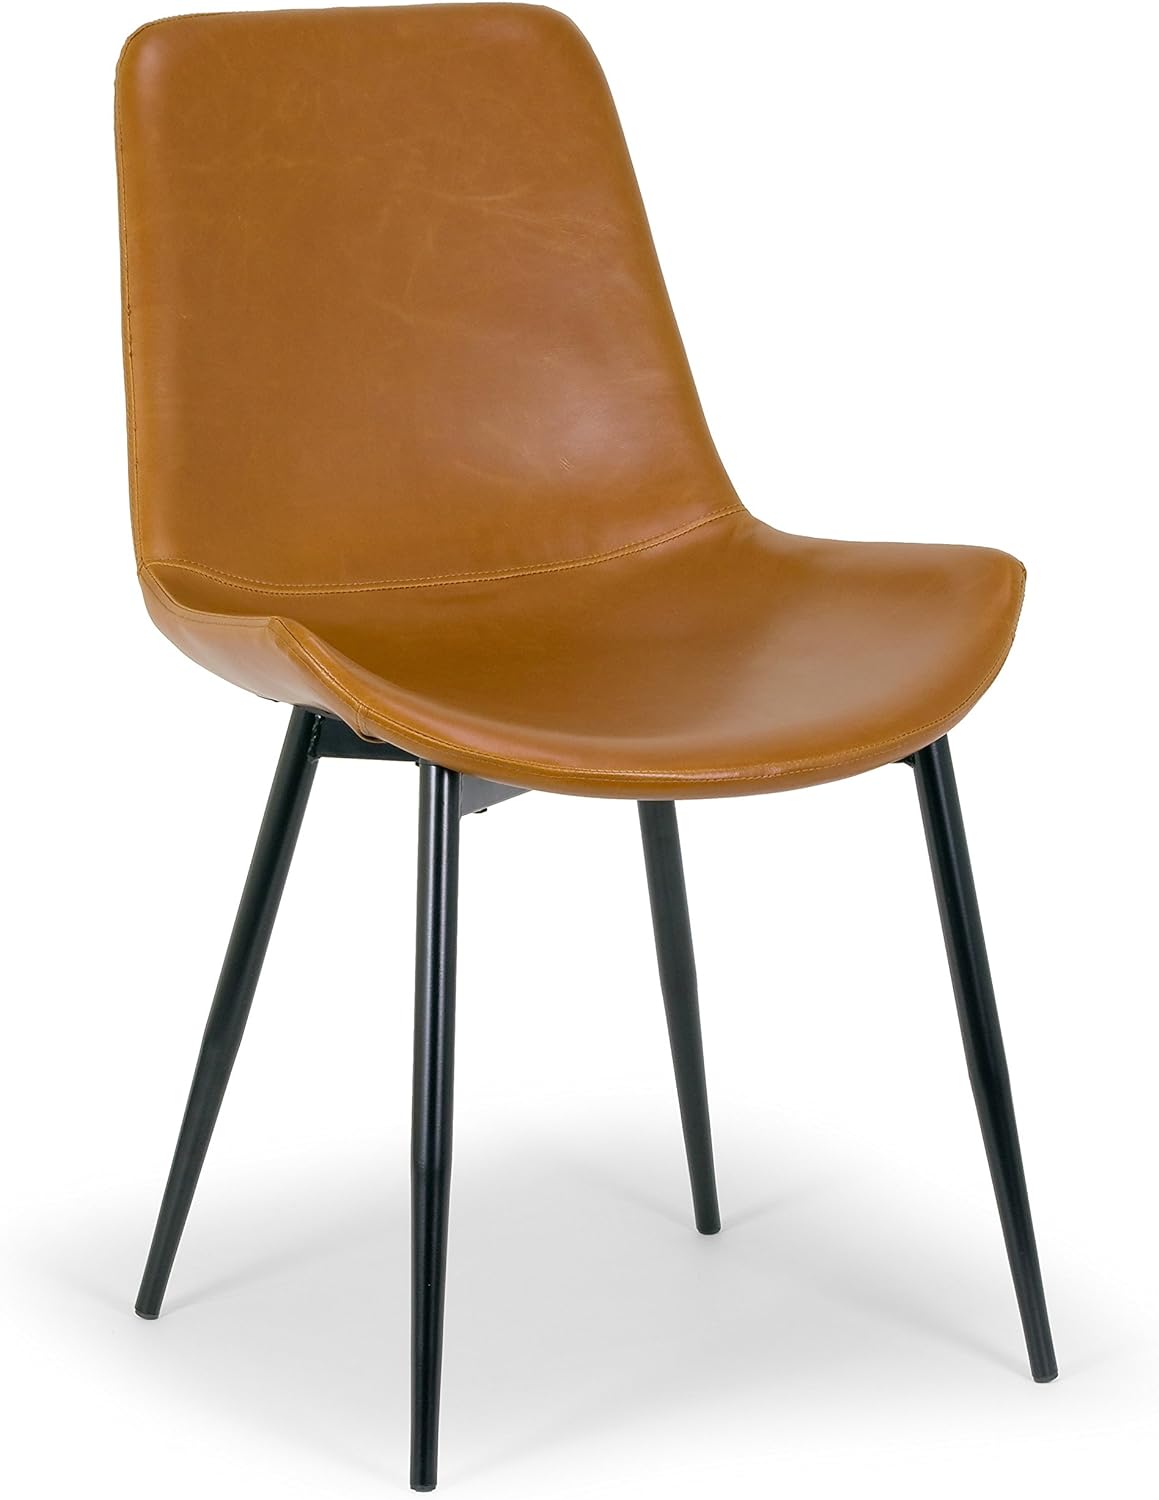 Alary Caramel Brown Faux Leather Modern Dining Chair (Set of 2)